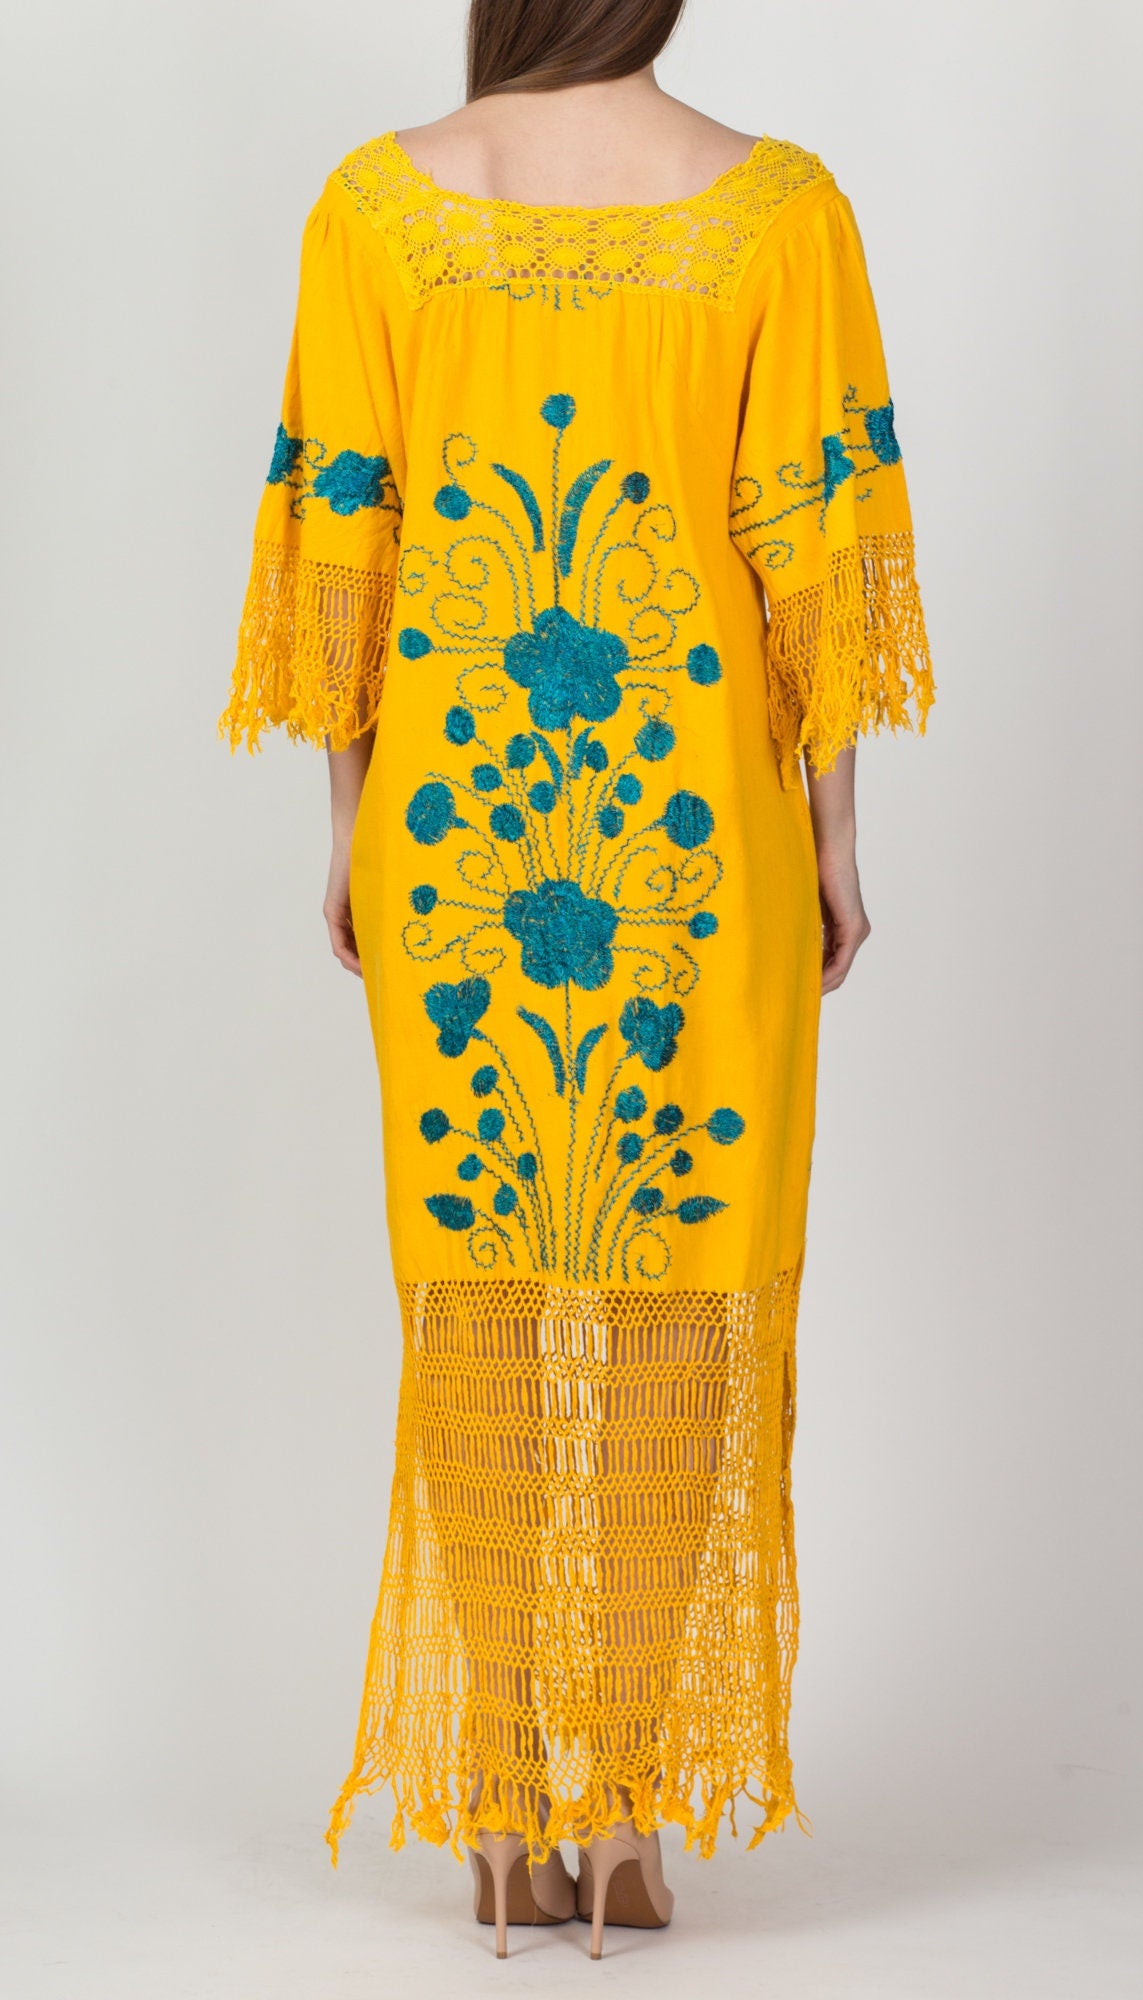 Vintage Mexican yellow woven Kaftan dress with embroidery details | Kaftan  dress, Clothing exchange, Vintage outfits